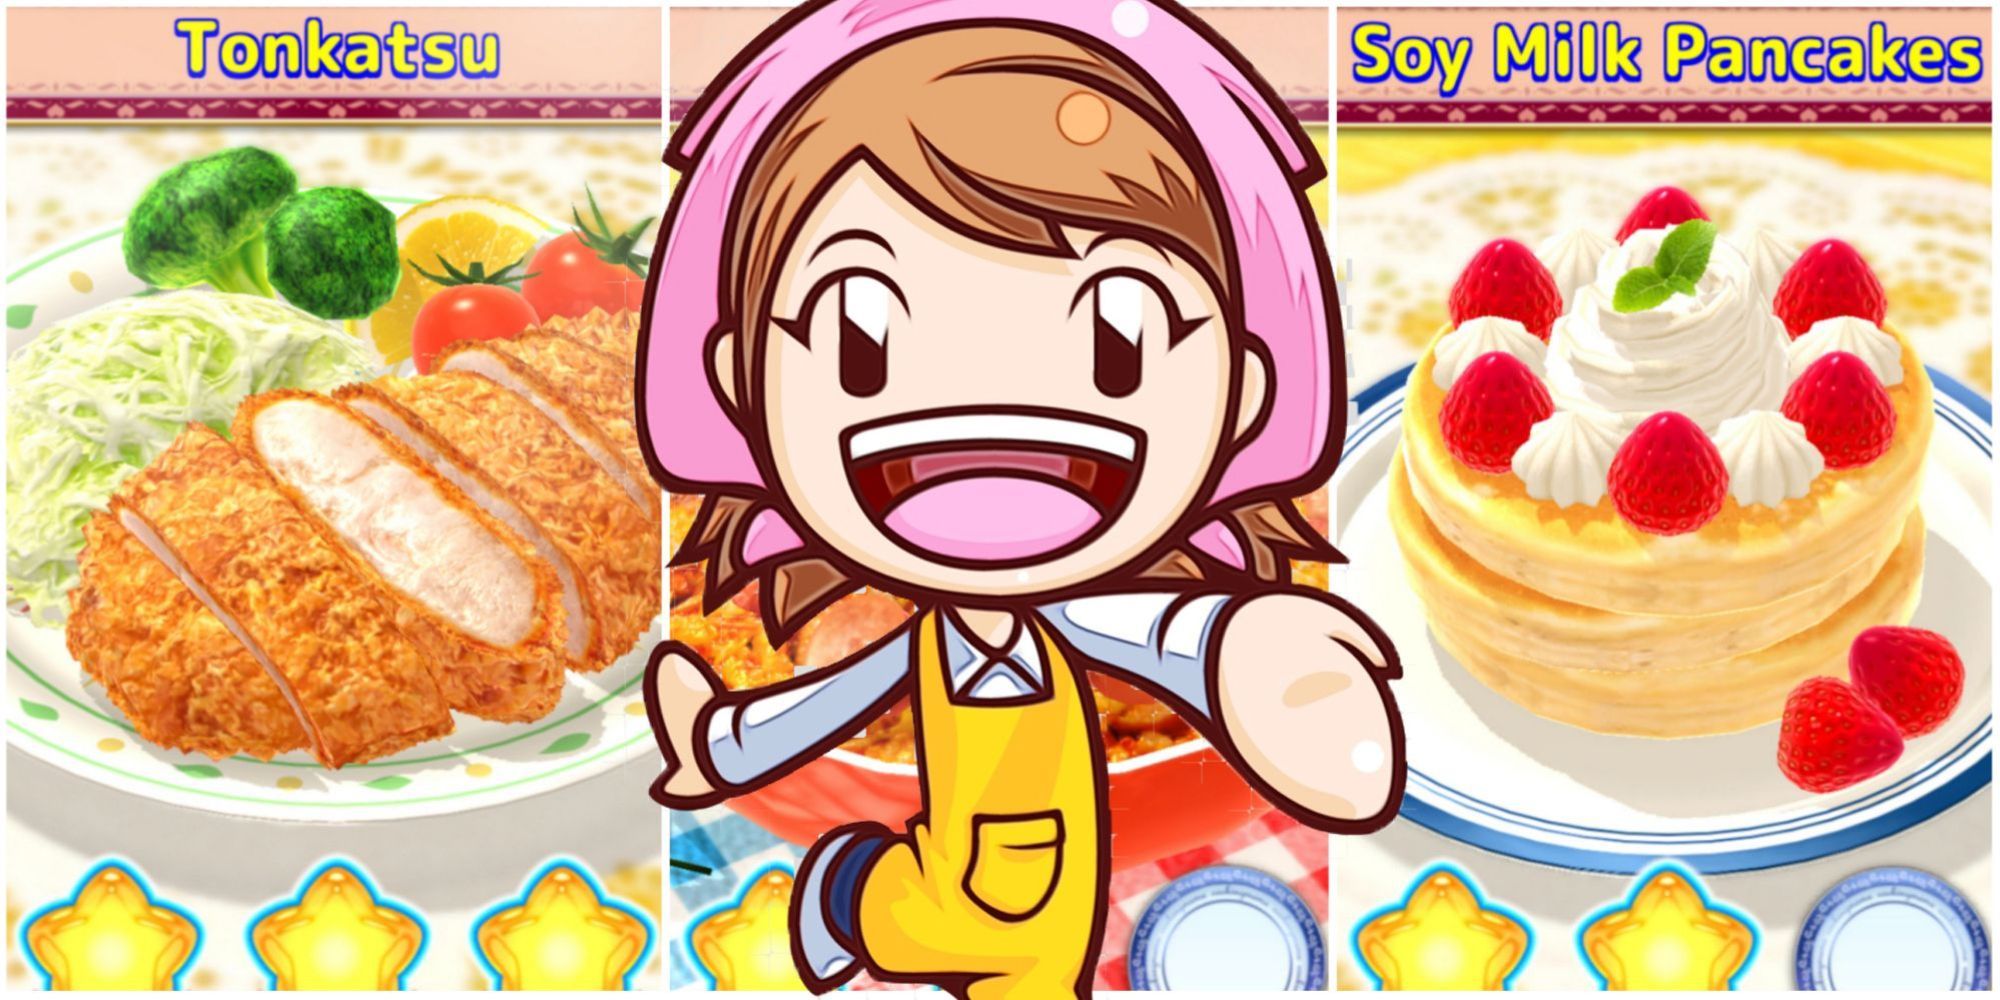 Split image of Tonkatsu and Soy Milk Pancakes with Cooking Mama overlaid presenting the dishes